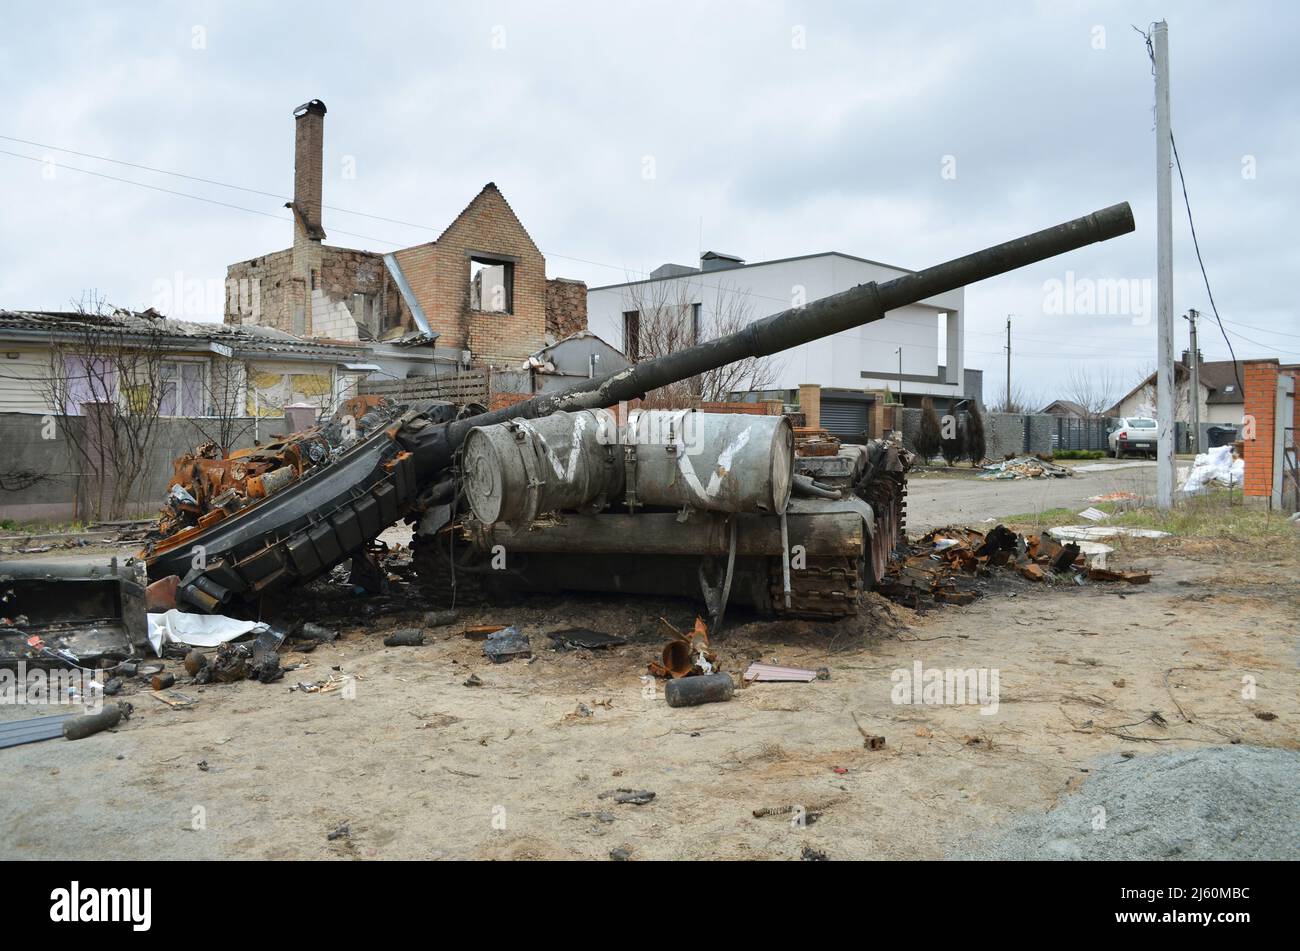 Dmytrivka village, Kyiv region, Ukraine - Apr 13, 2022: Destroyed Russian tank with a white painting V following the Ukrainian forces counter-attacks. Stock Photo